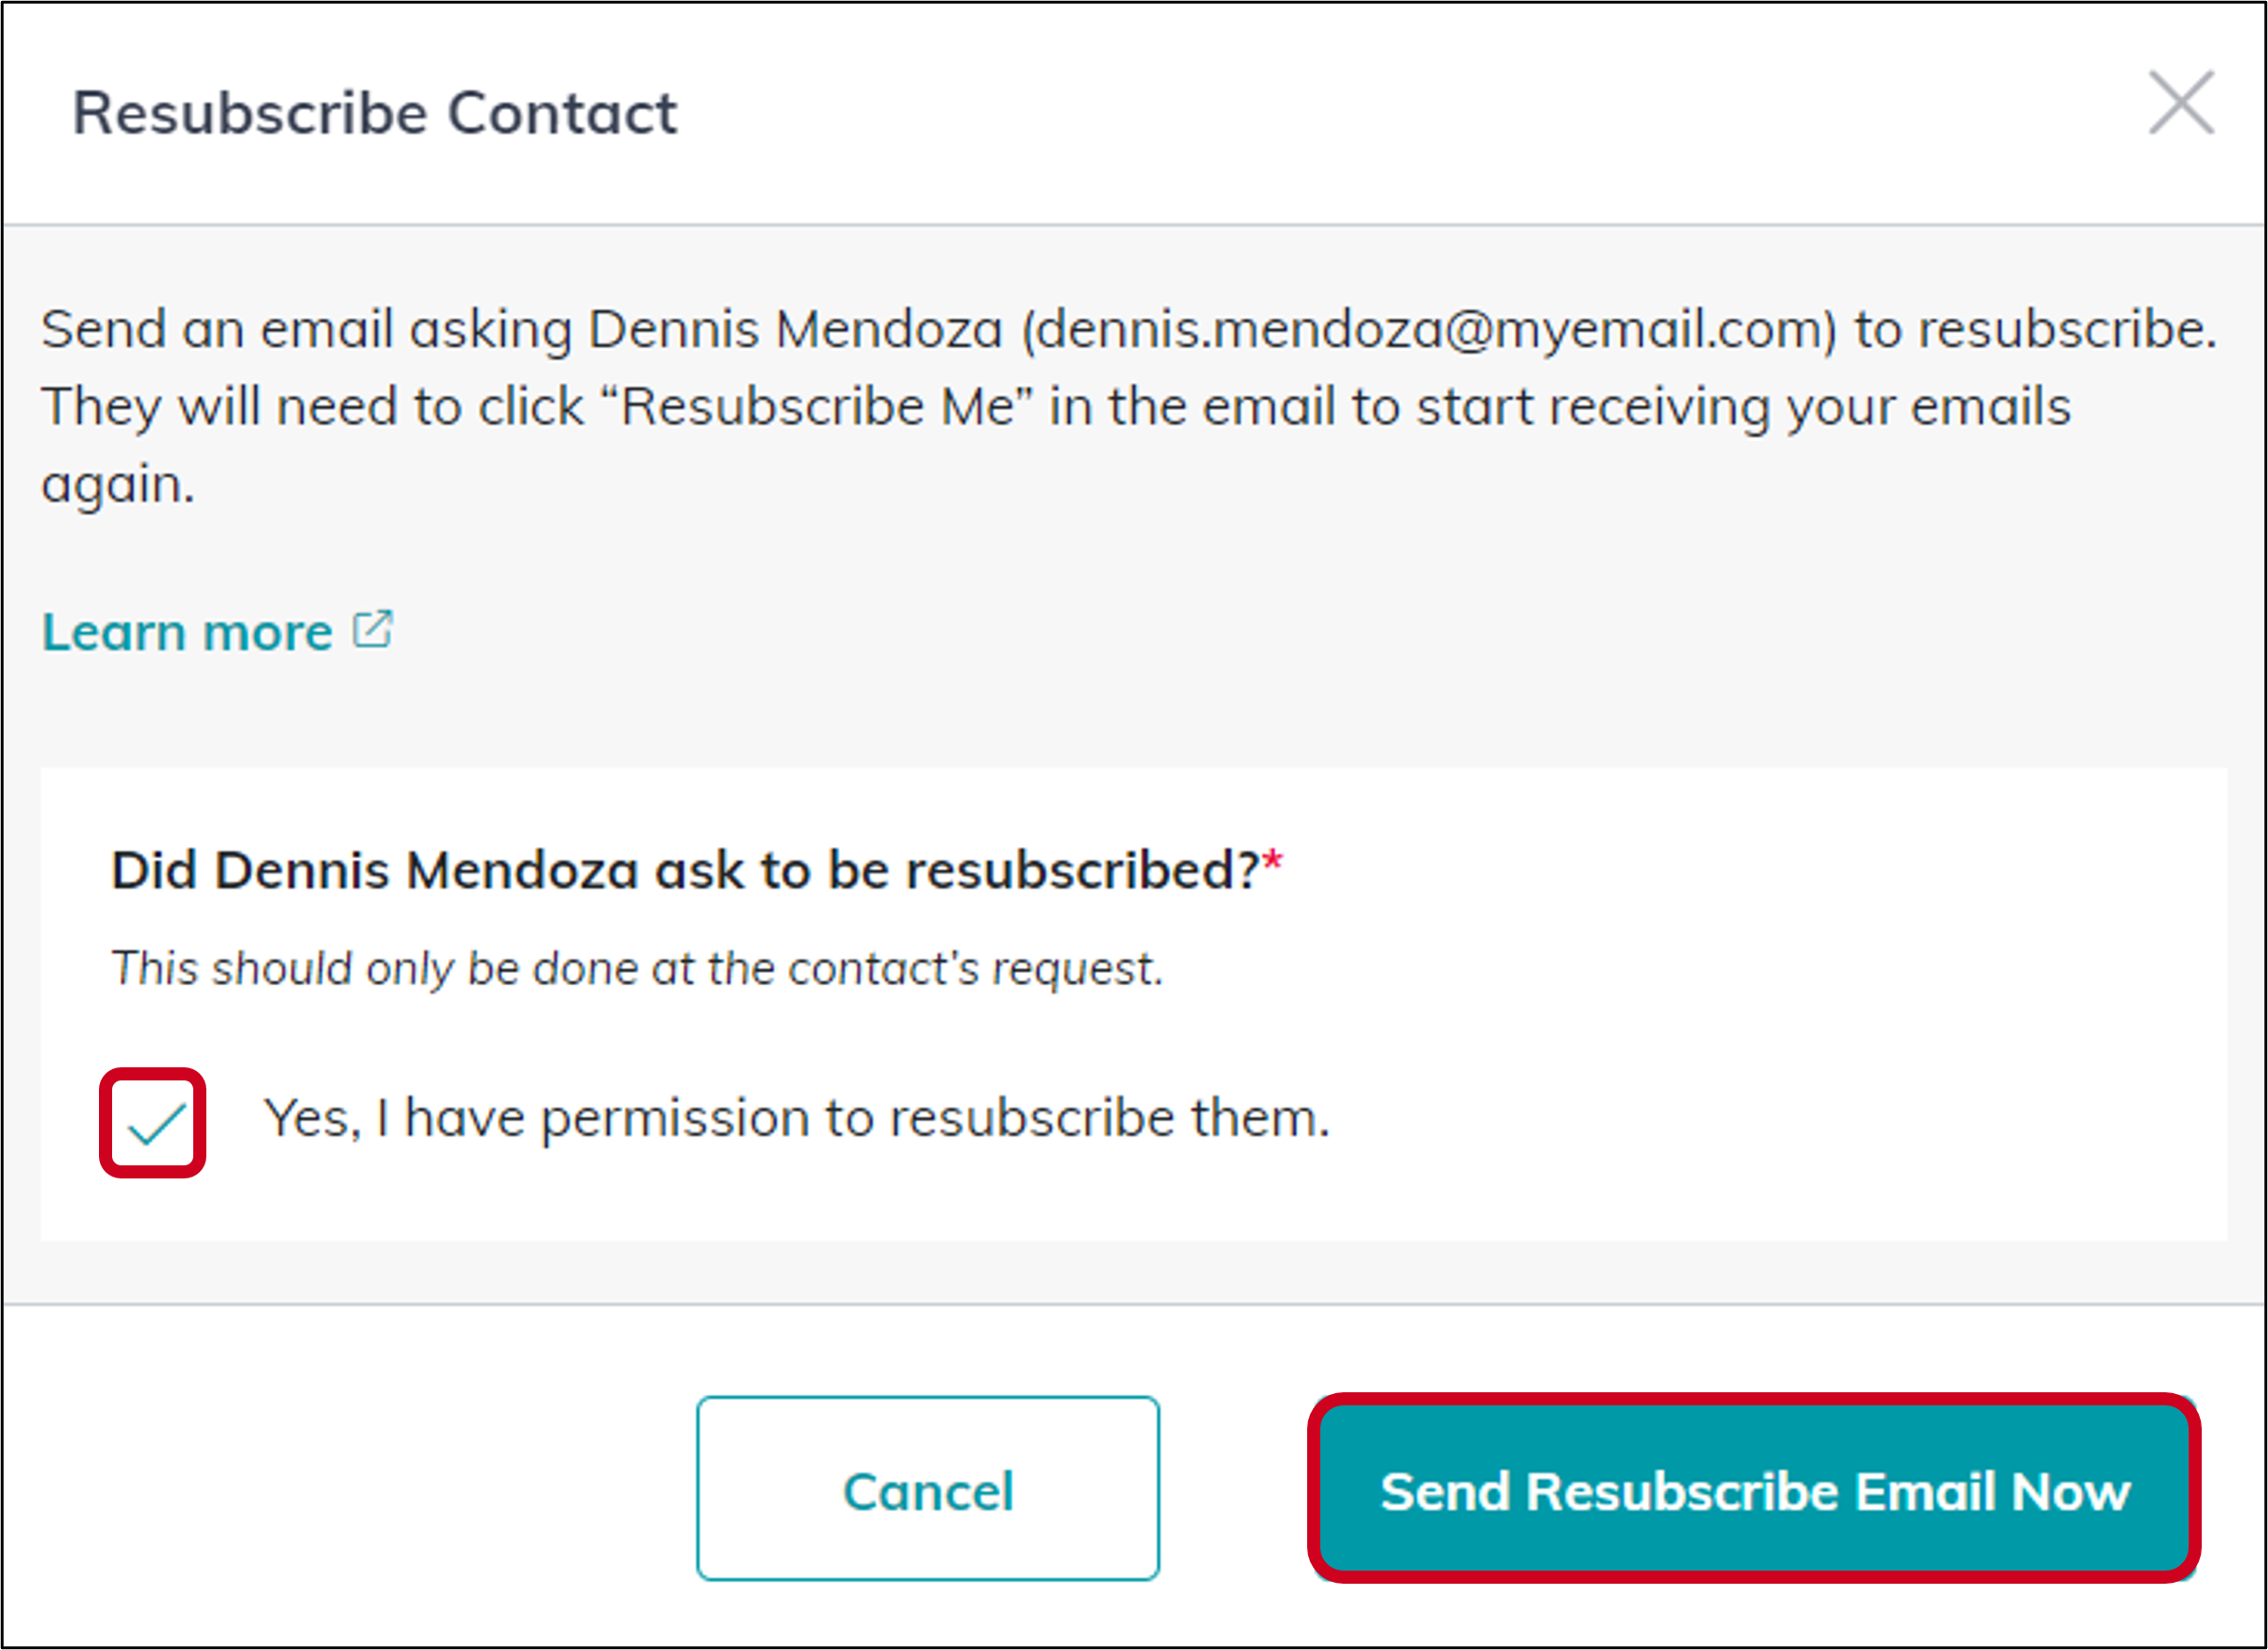 contact_click_consent_then_click_send_resubscribe_email.png